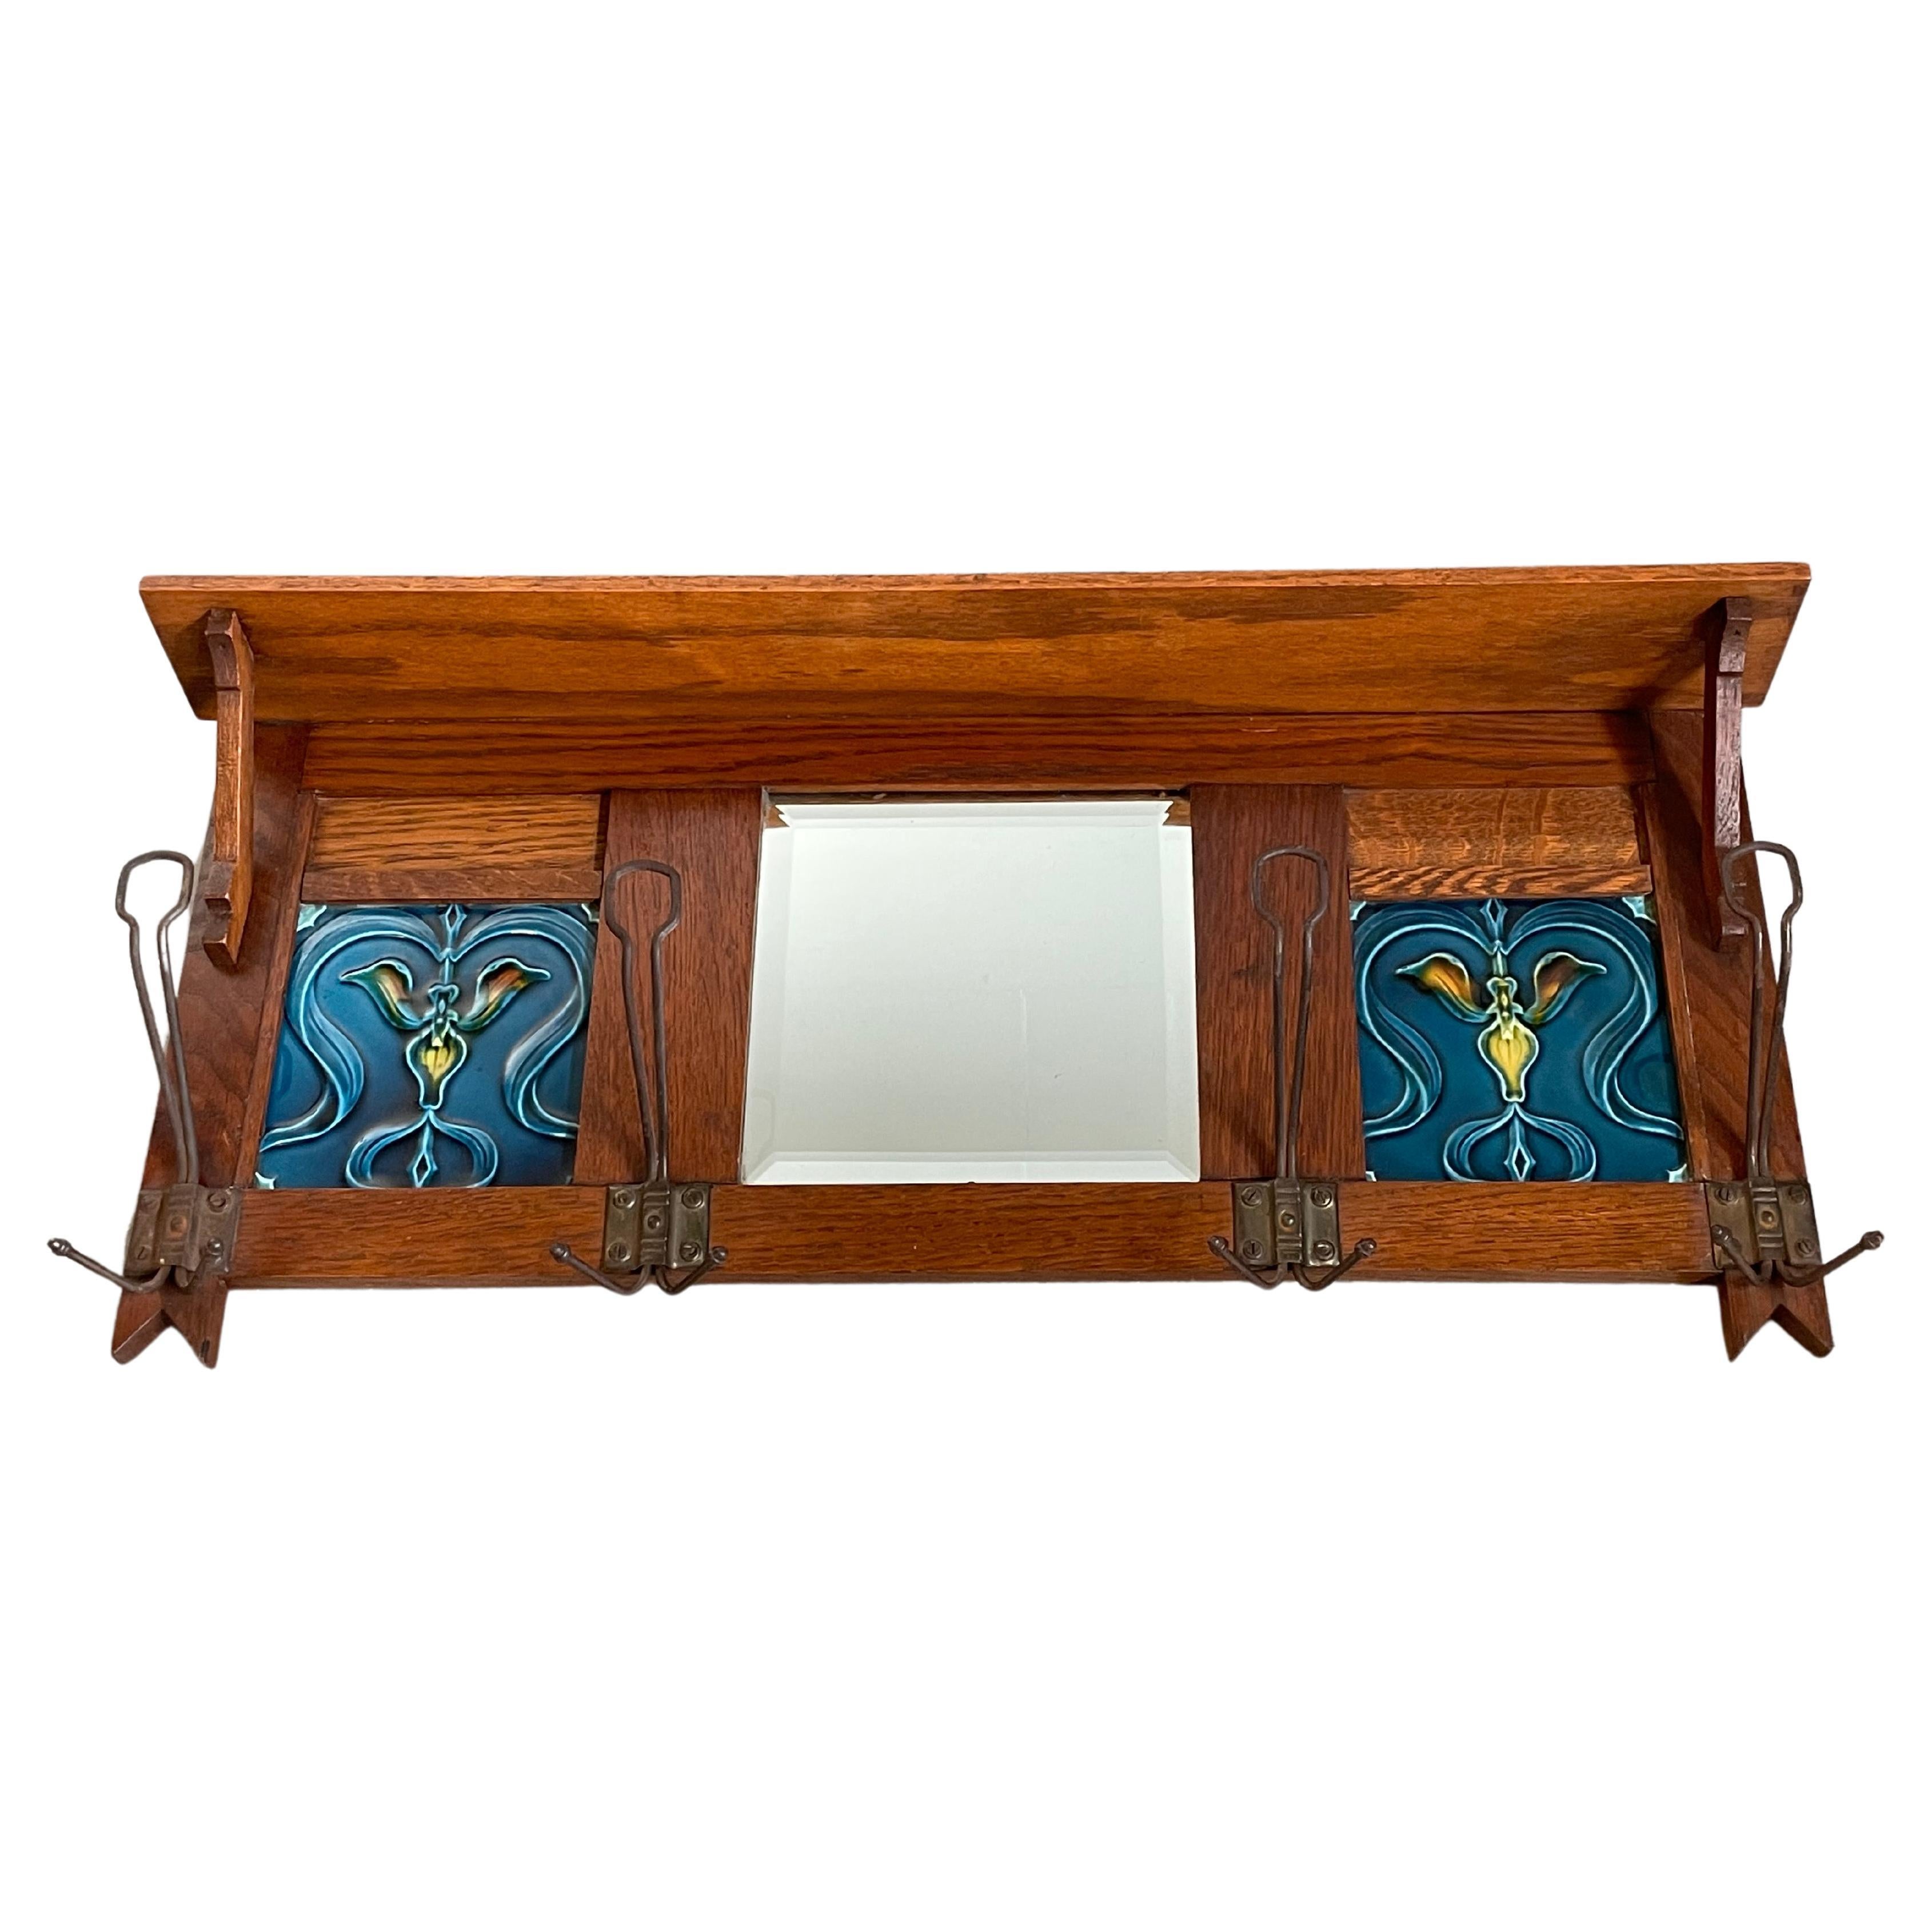 Early 1900 Arts and Crafts Oak Wall Coat Rack w. Majolica Tiles & Beveled Mirror